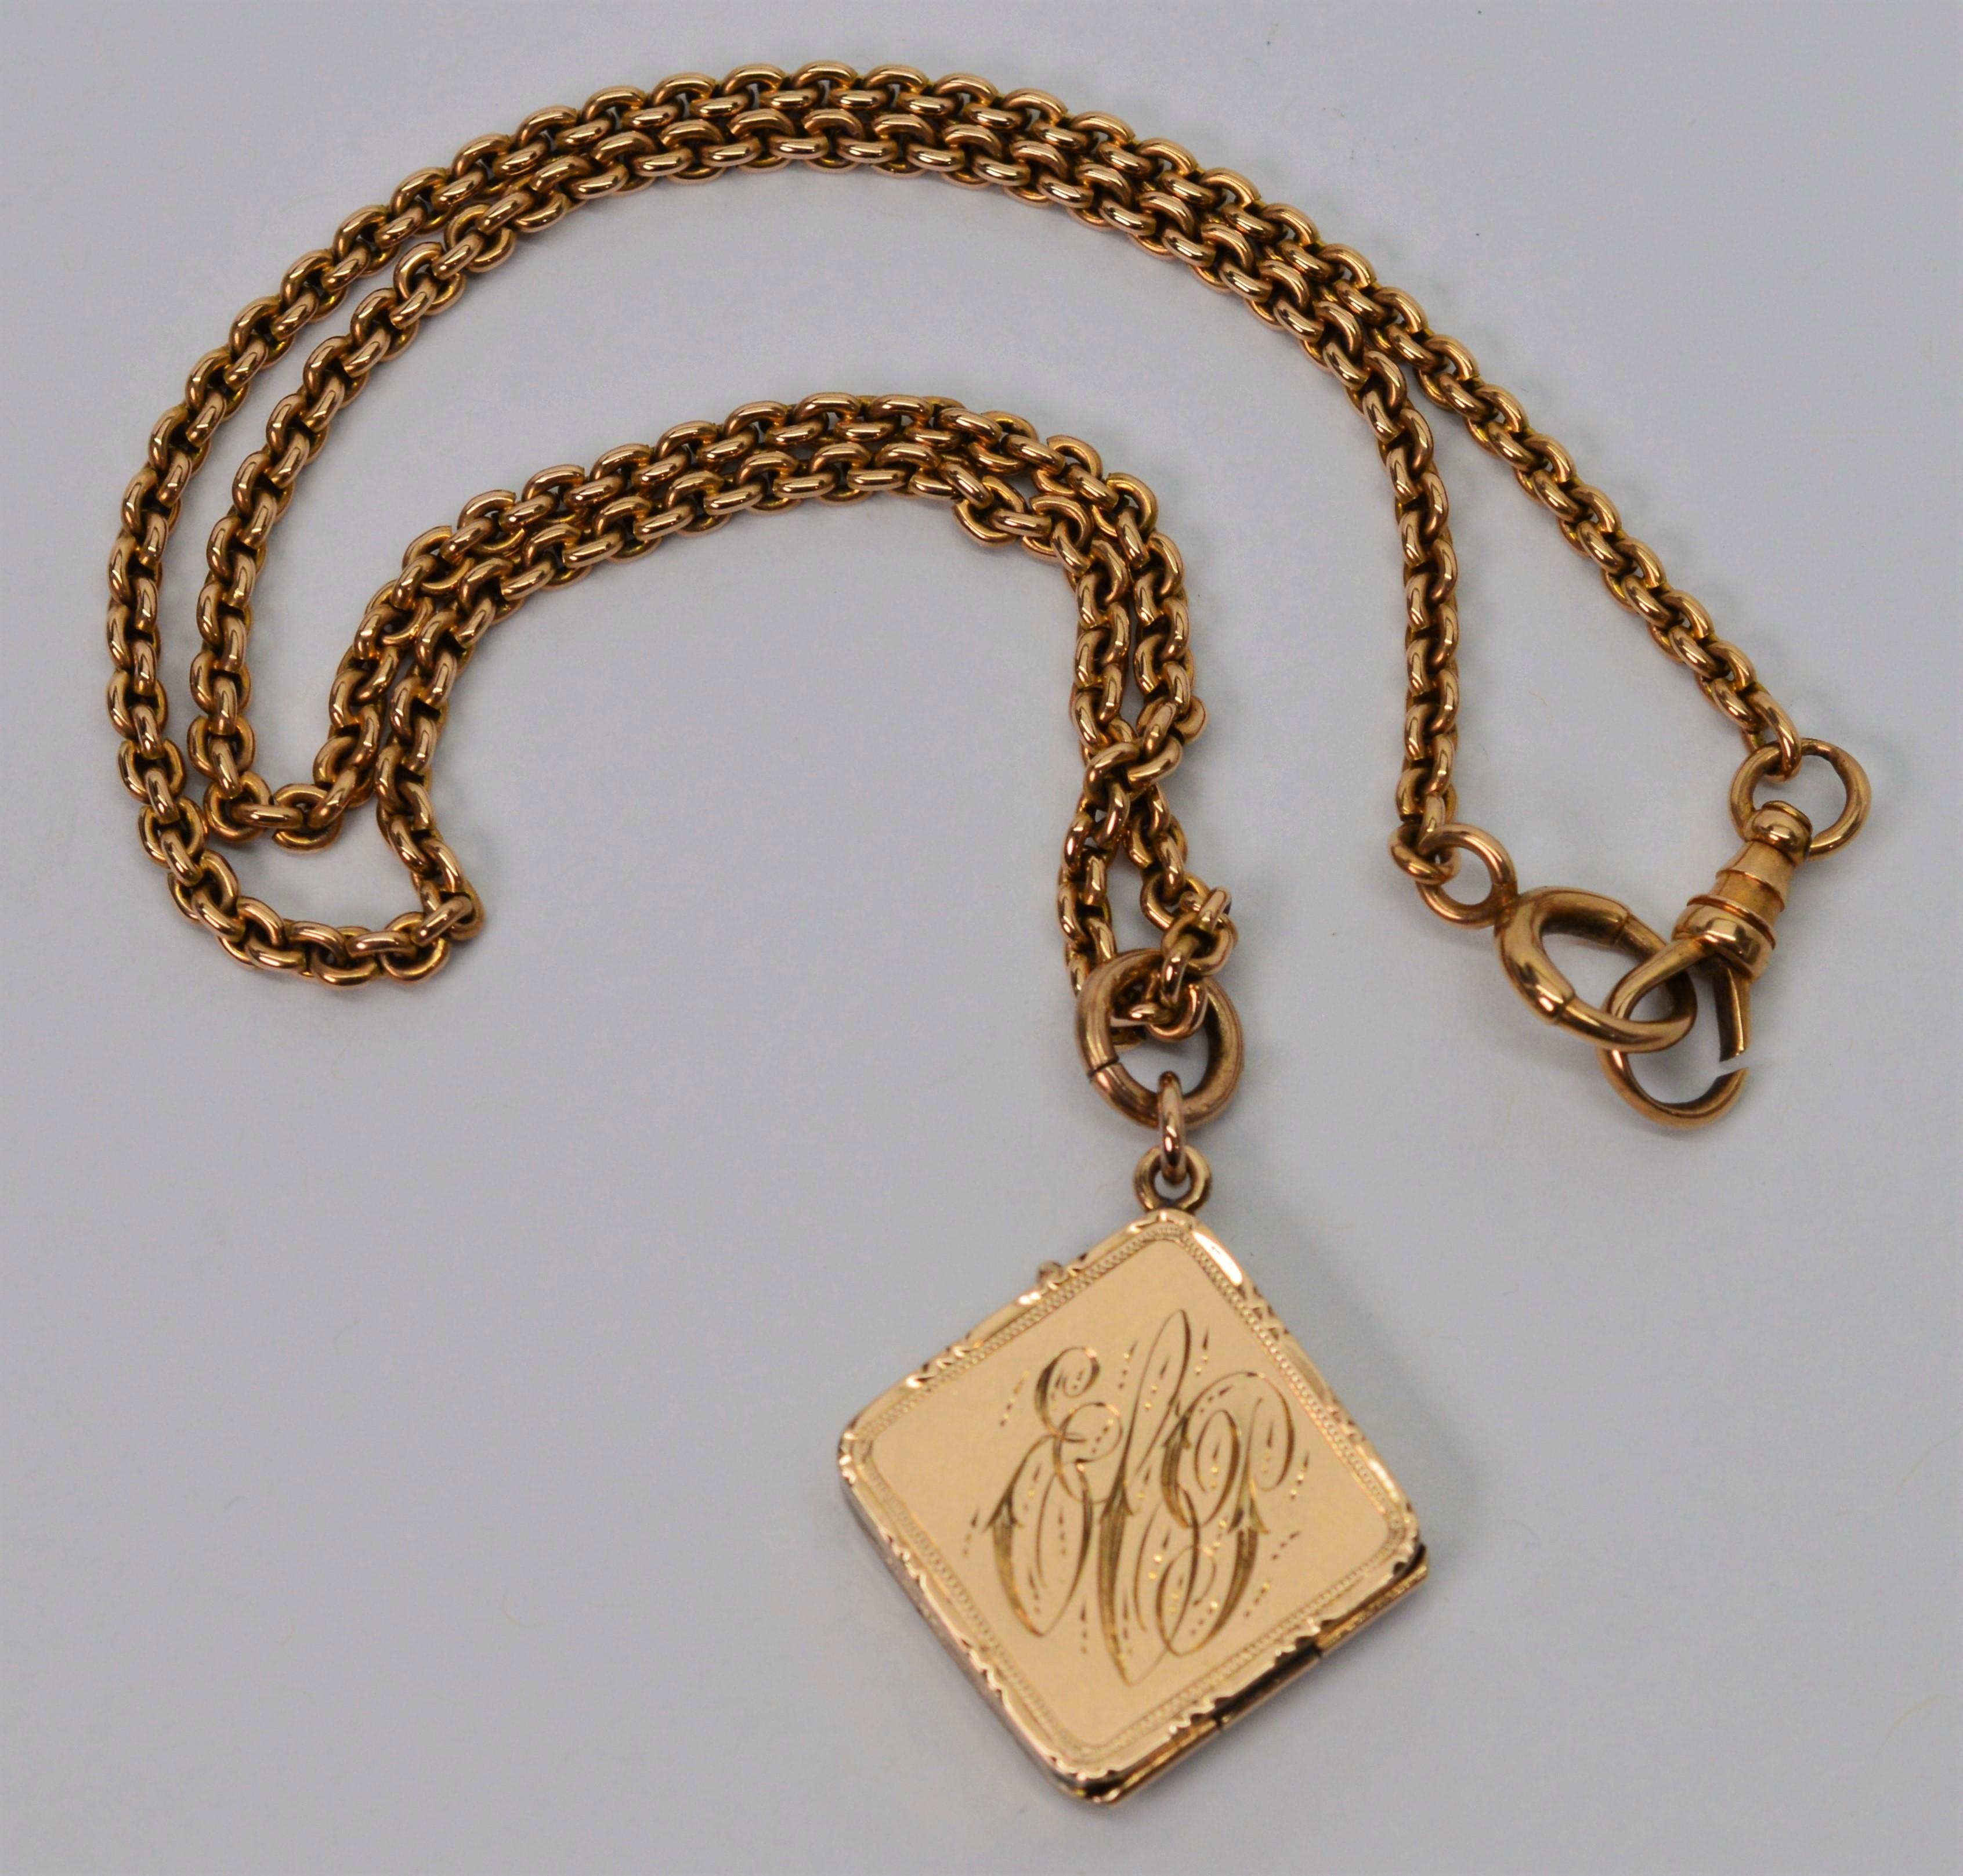 A unique antique piece to wear as a charming one of a kind necklace or a great complement to a vintage pocket watch or watch charm.
This antique cable chain is fourteen karat 14k yellow gold and is finished with a dog clip and spring ring. Floating